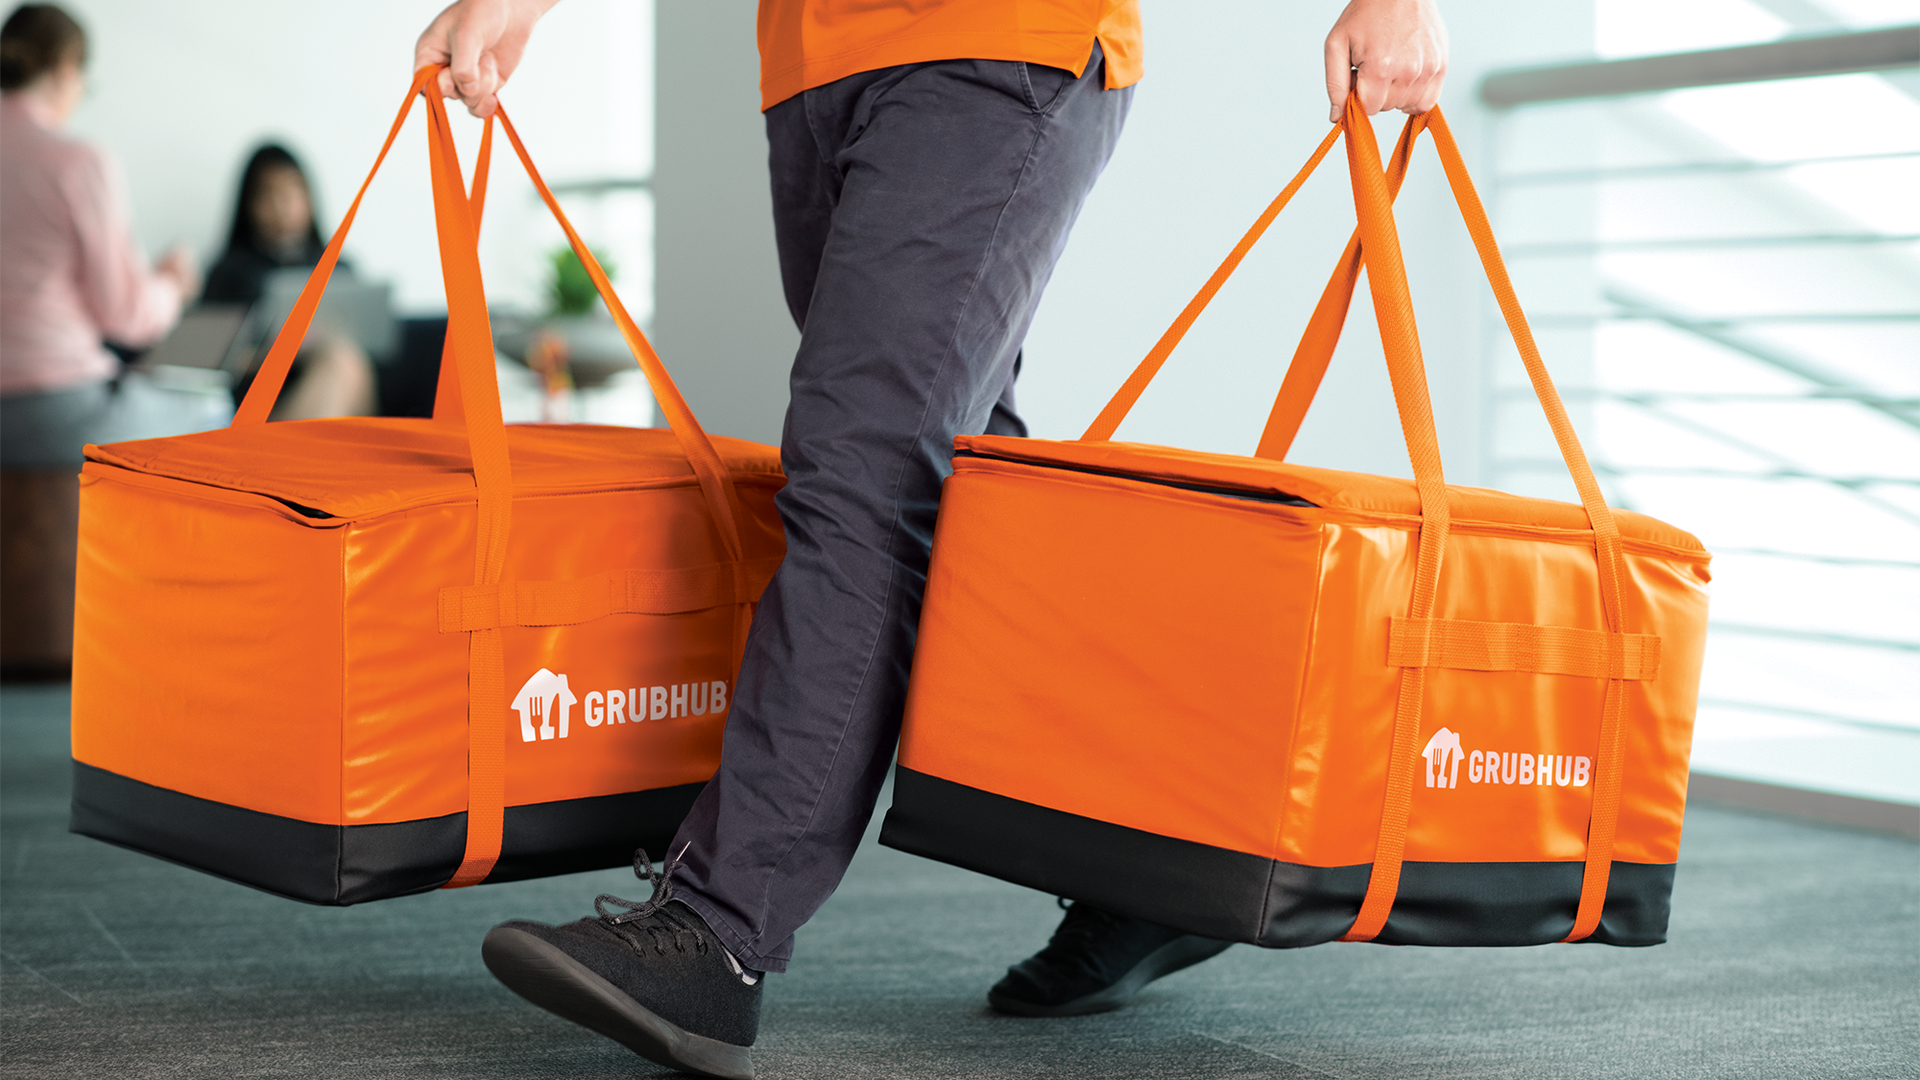 Delivery person holding Grubhub bags